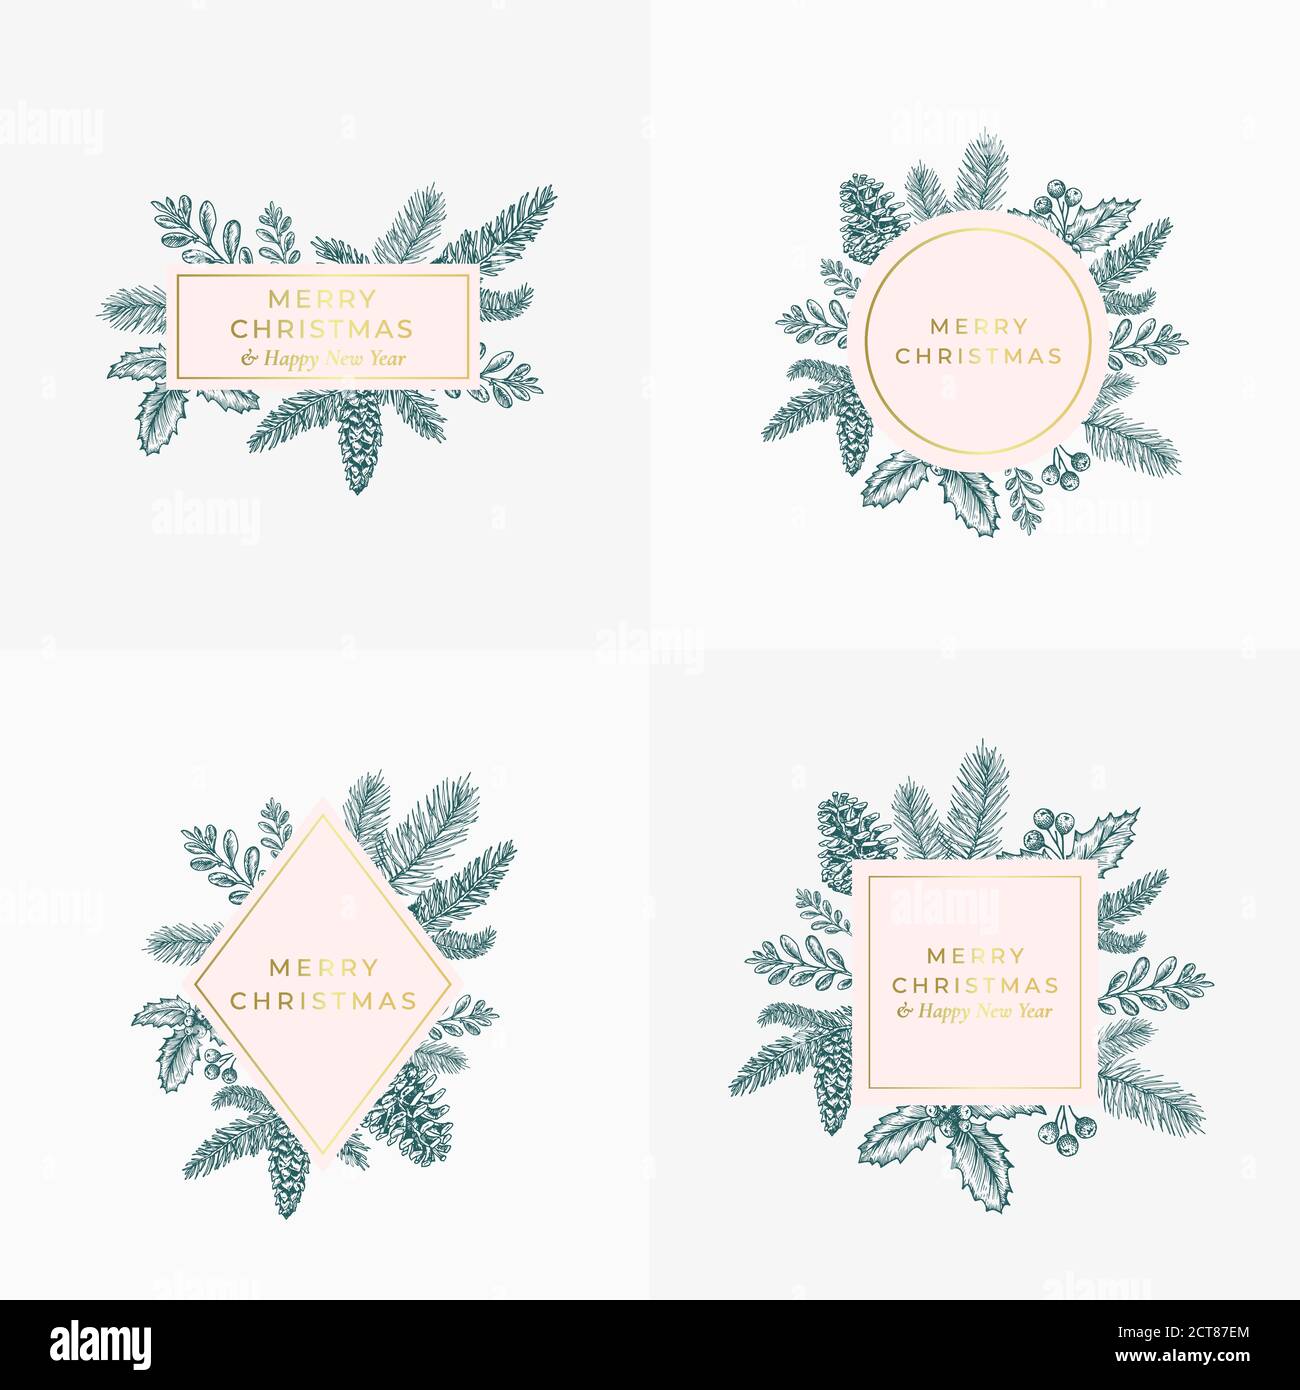 Set of Christmas Foliage Cards, Signs or Logo Templates. Hand Drawn Christmas Illustrations with Borders and Classy Typography. Good for Greetings Stock Vector